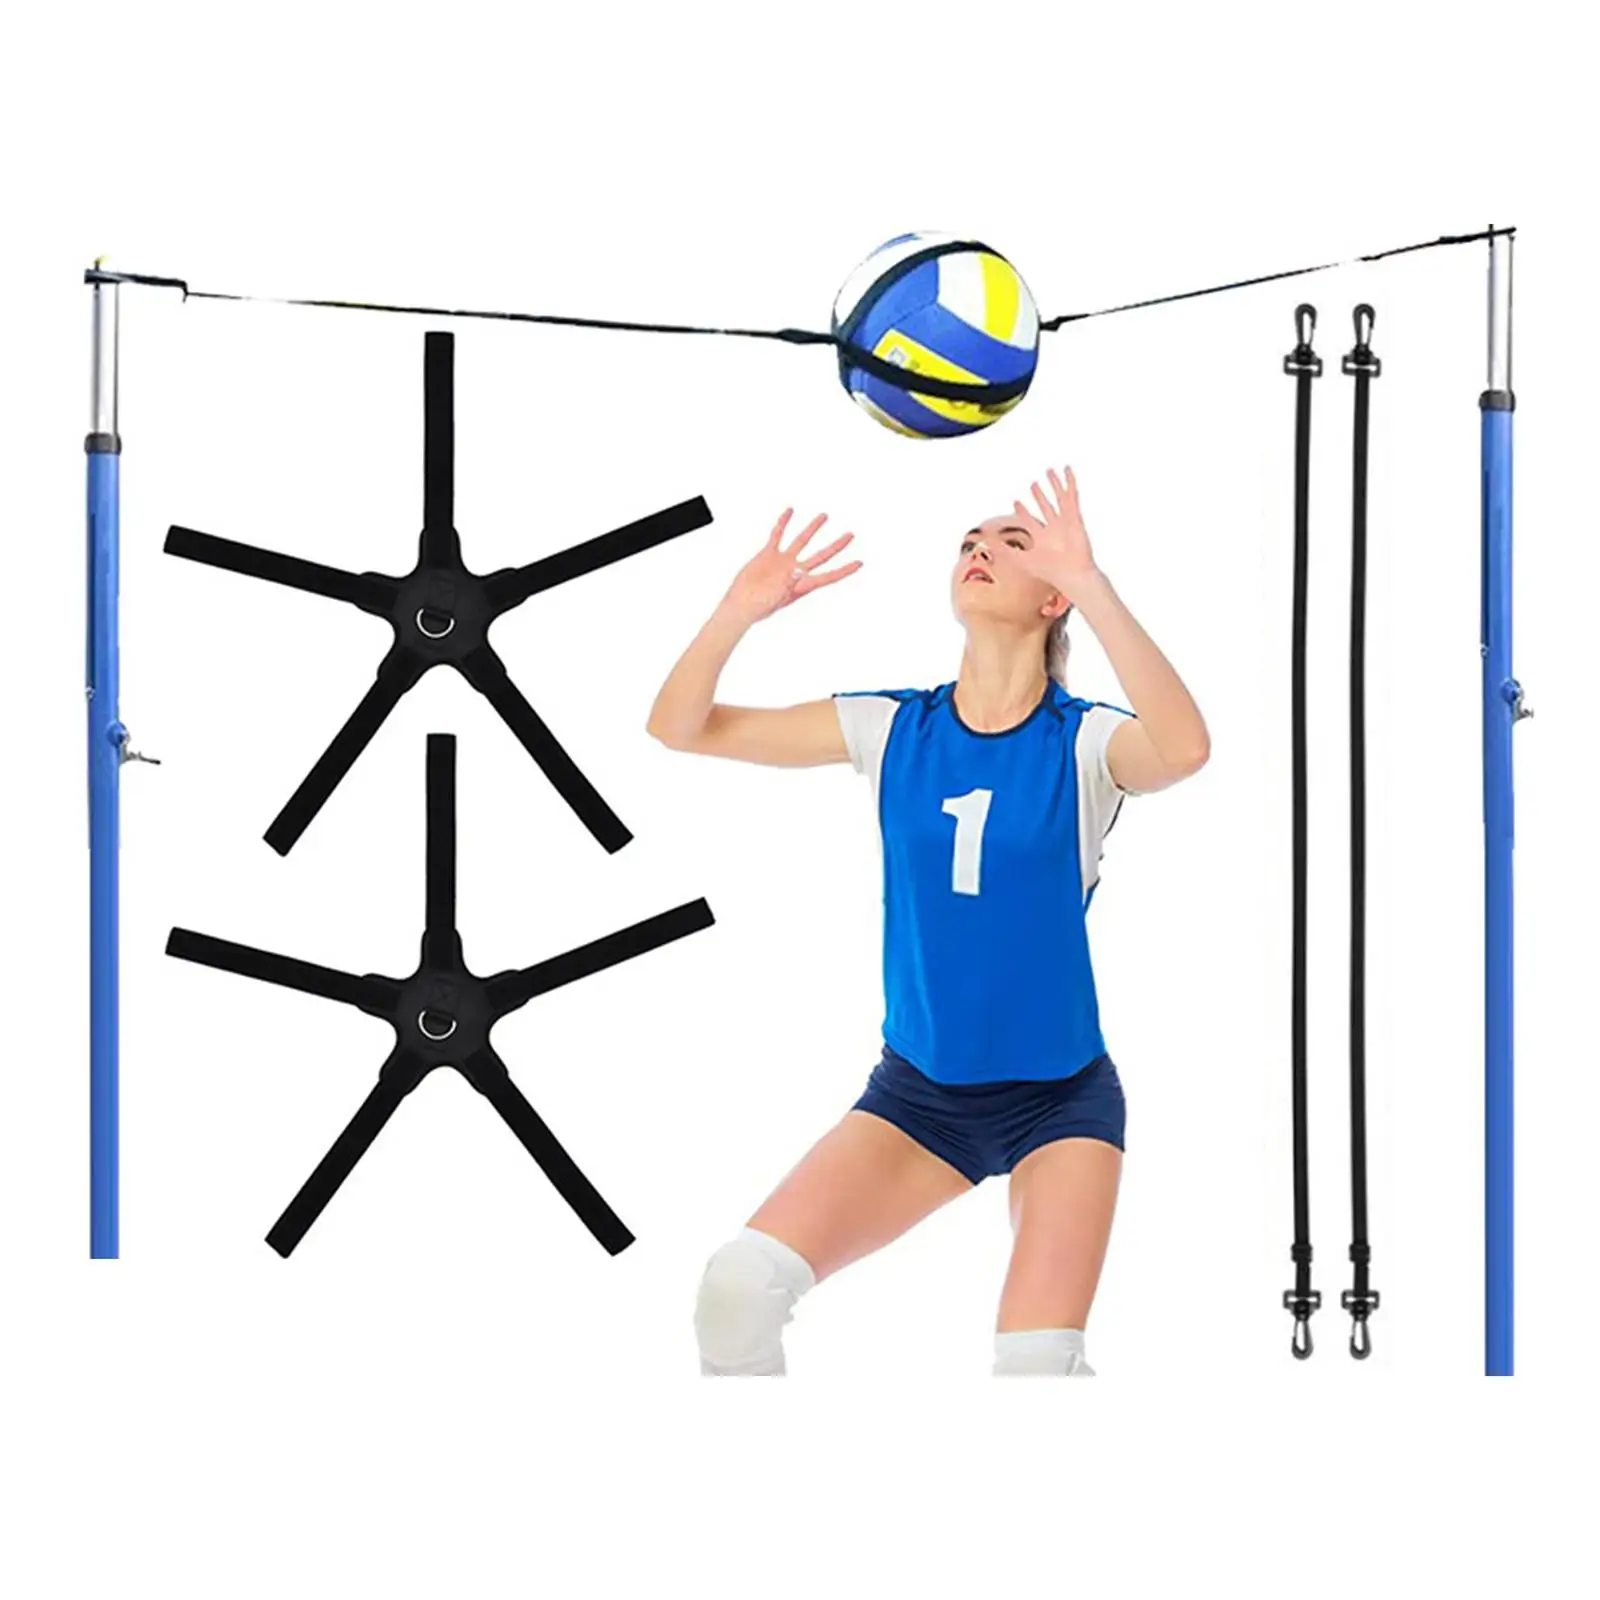 Volleyball Training Equipment Aid Solo Practice Trainer Elastic Belt Gifts for Jumping Beginners Practicing Serving Arm Swing